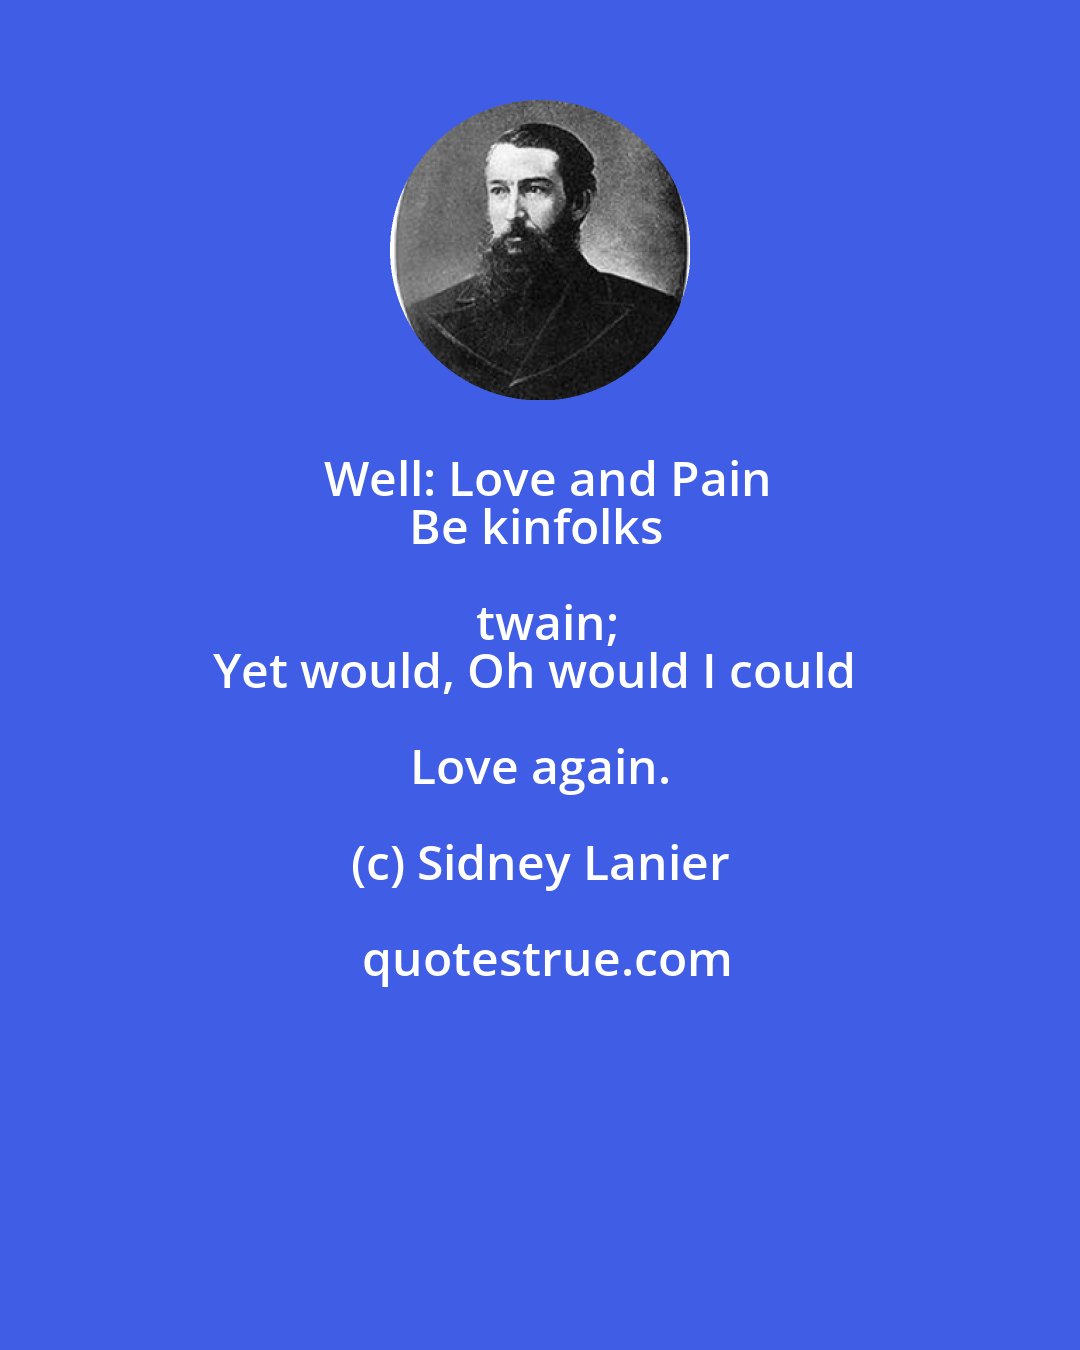 Sidney Lanier: Well: Love and Pain
Be kinfolks twain;
Yet would, Oh would I could Love again.